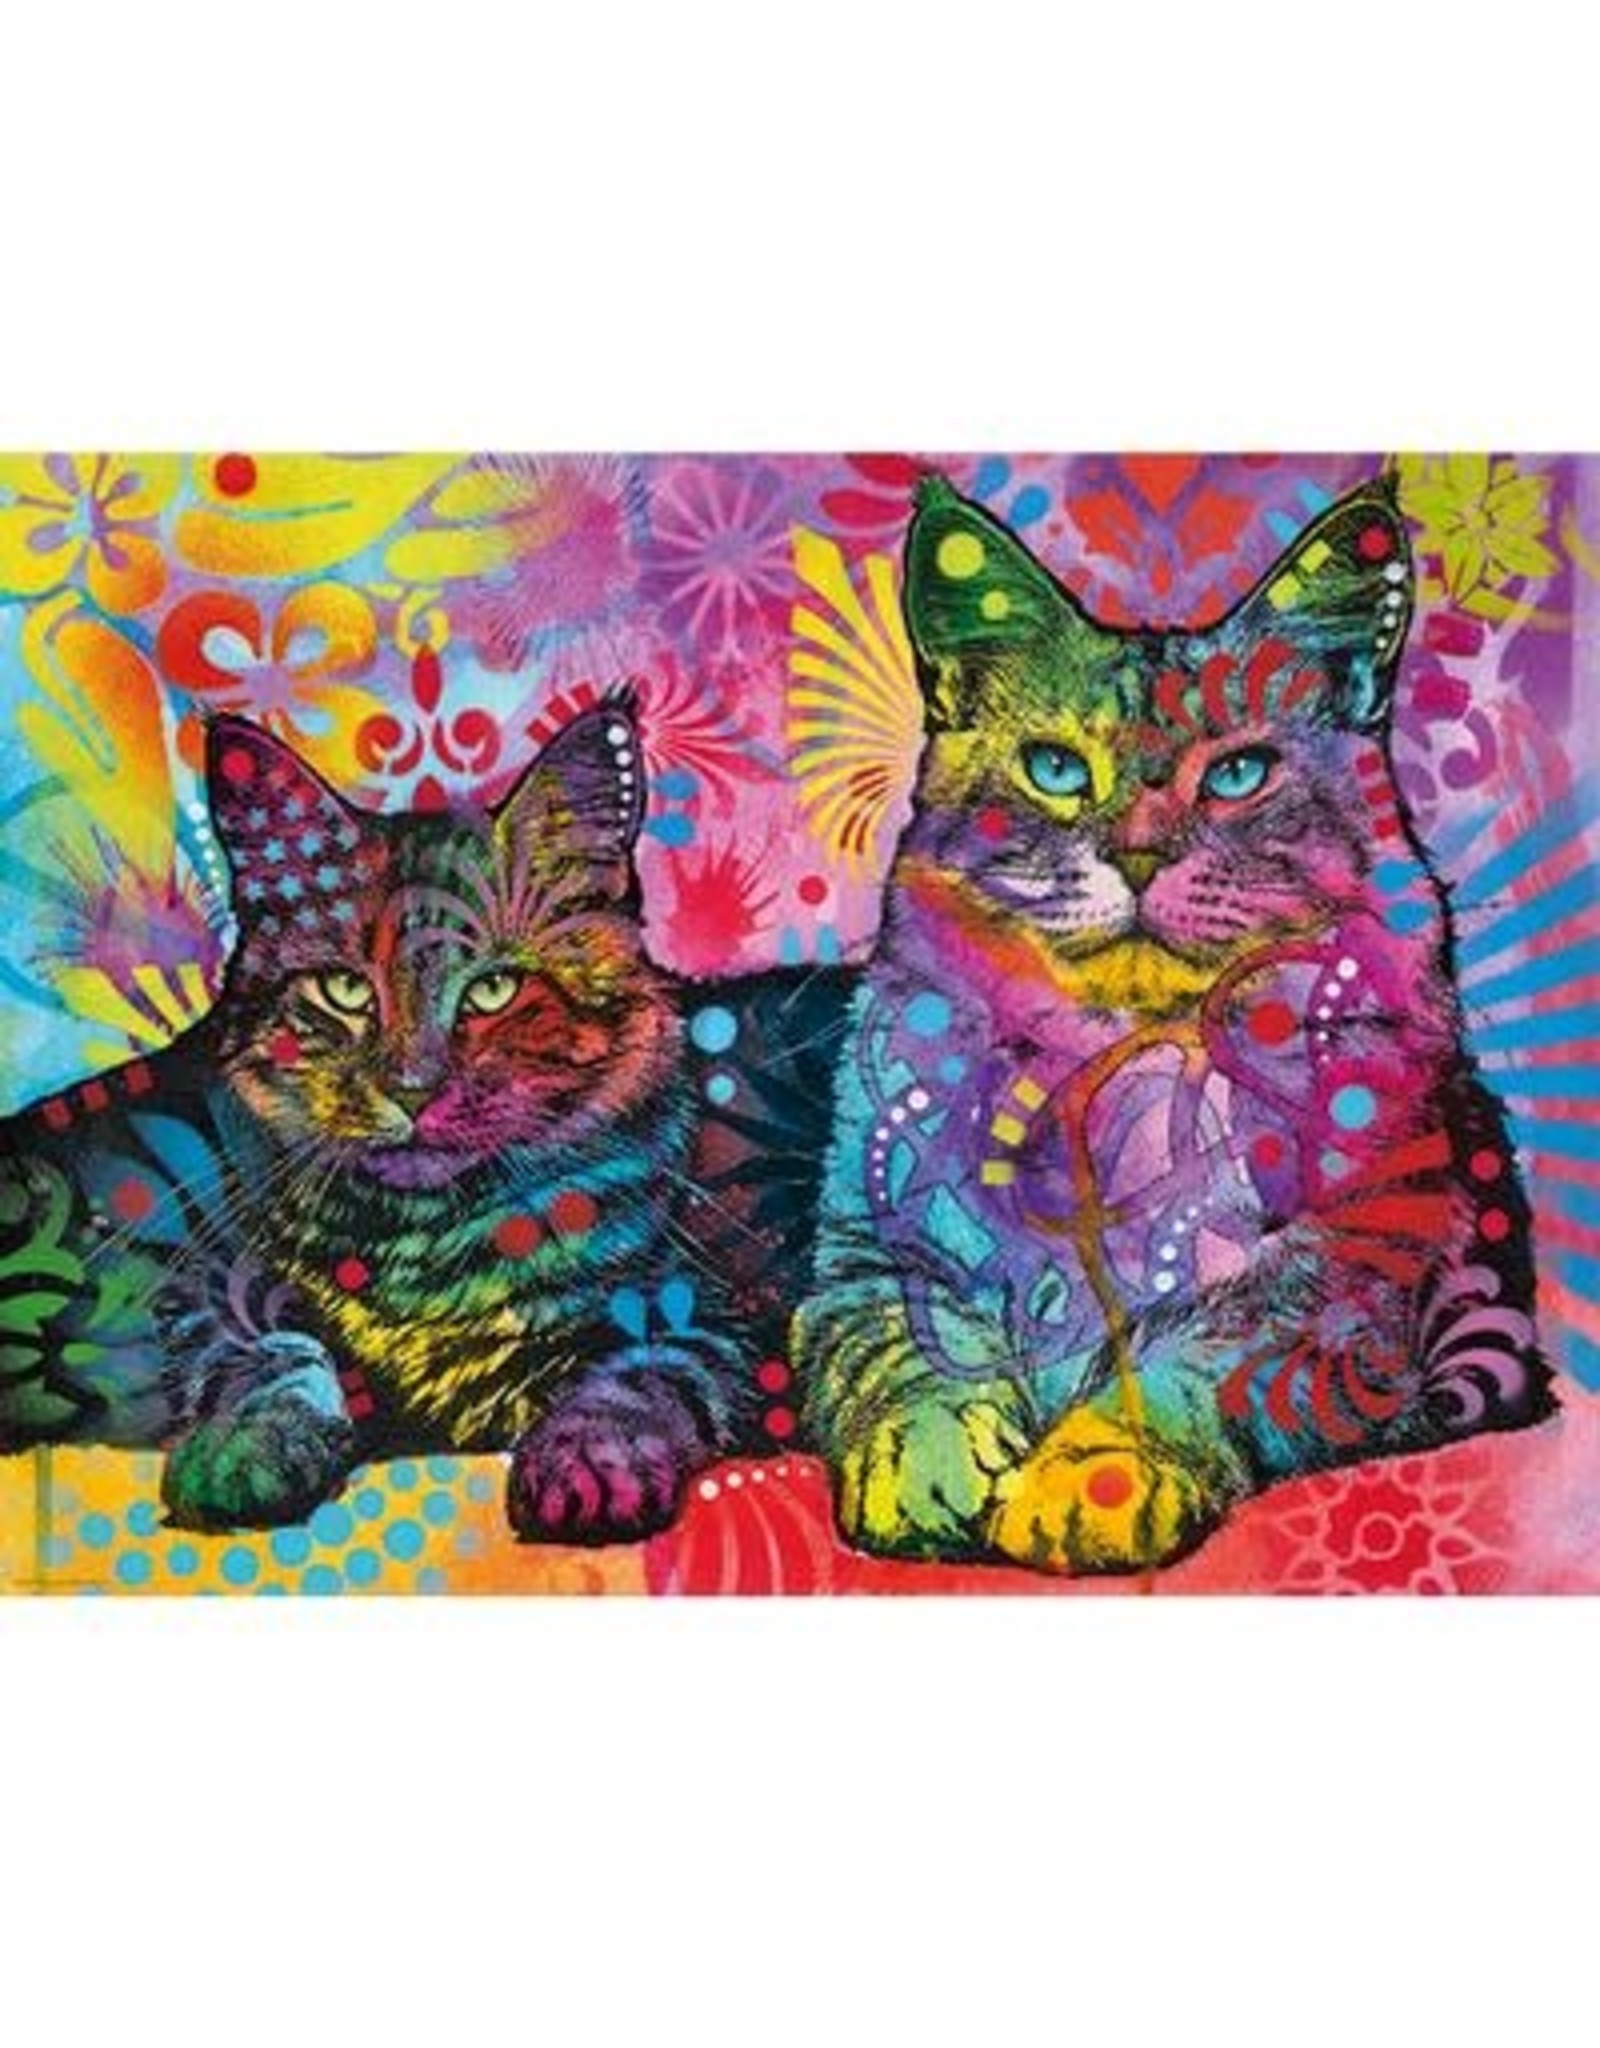 Heye Jolly Pets Puzzle (1000 piece) - devoted 2 cats